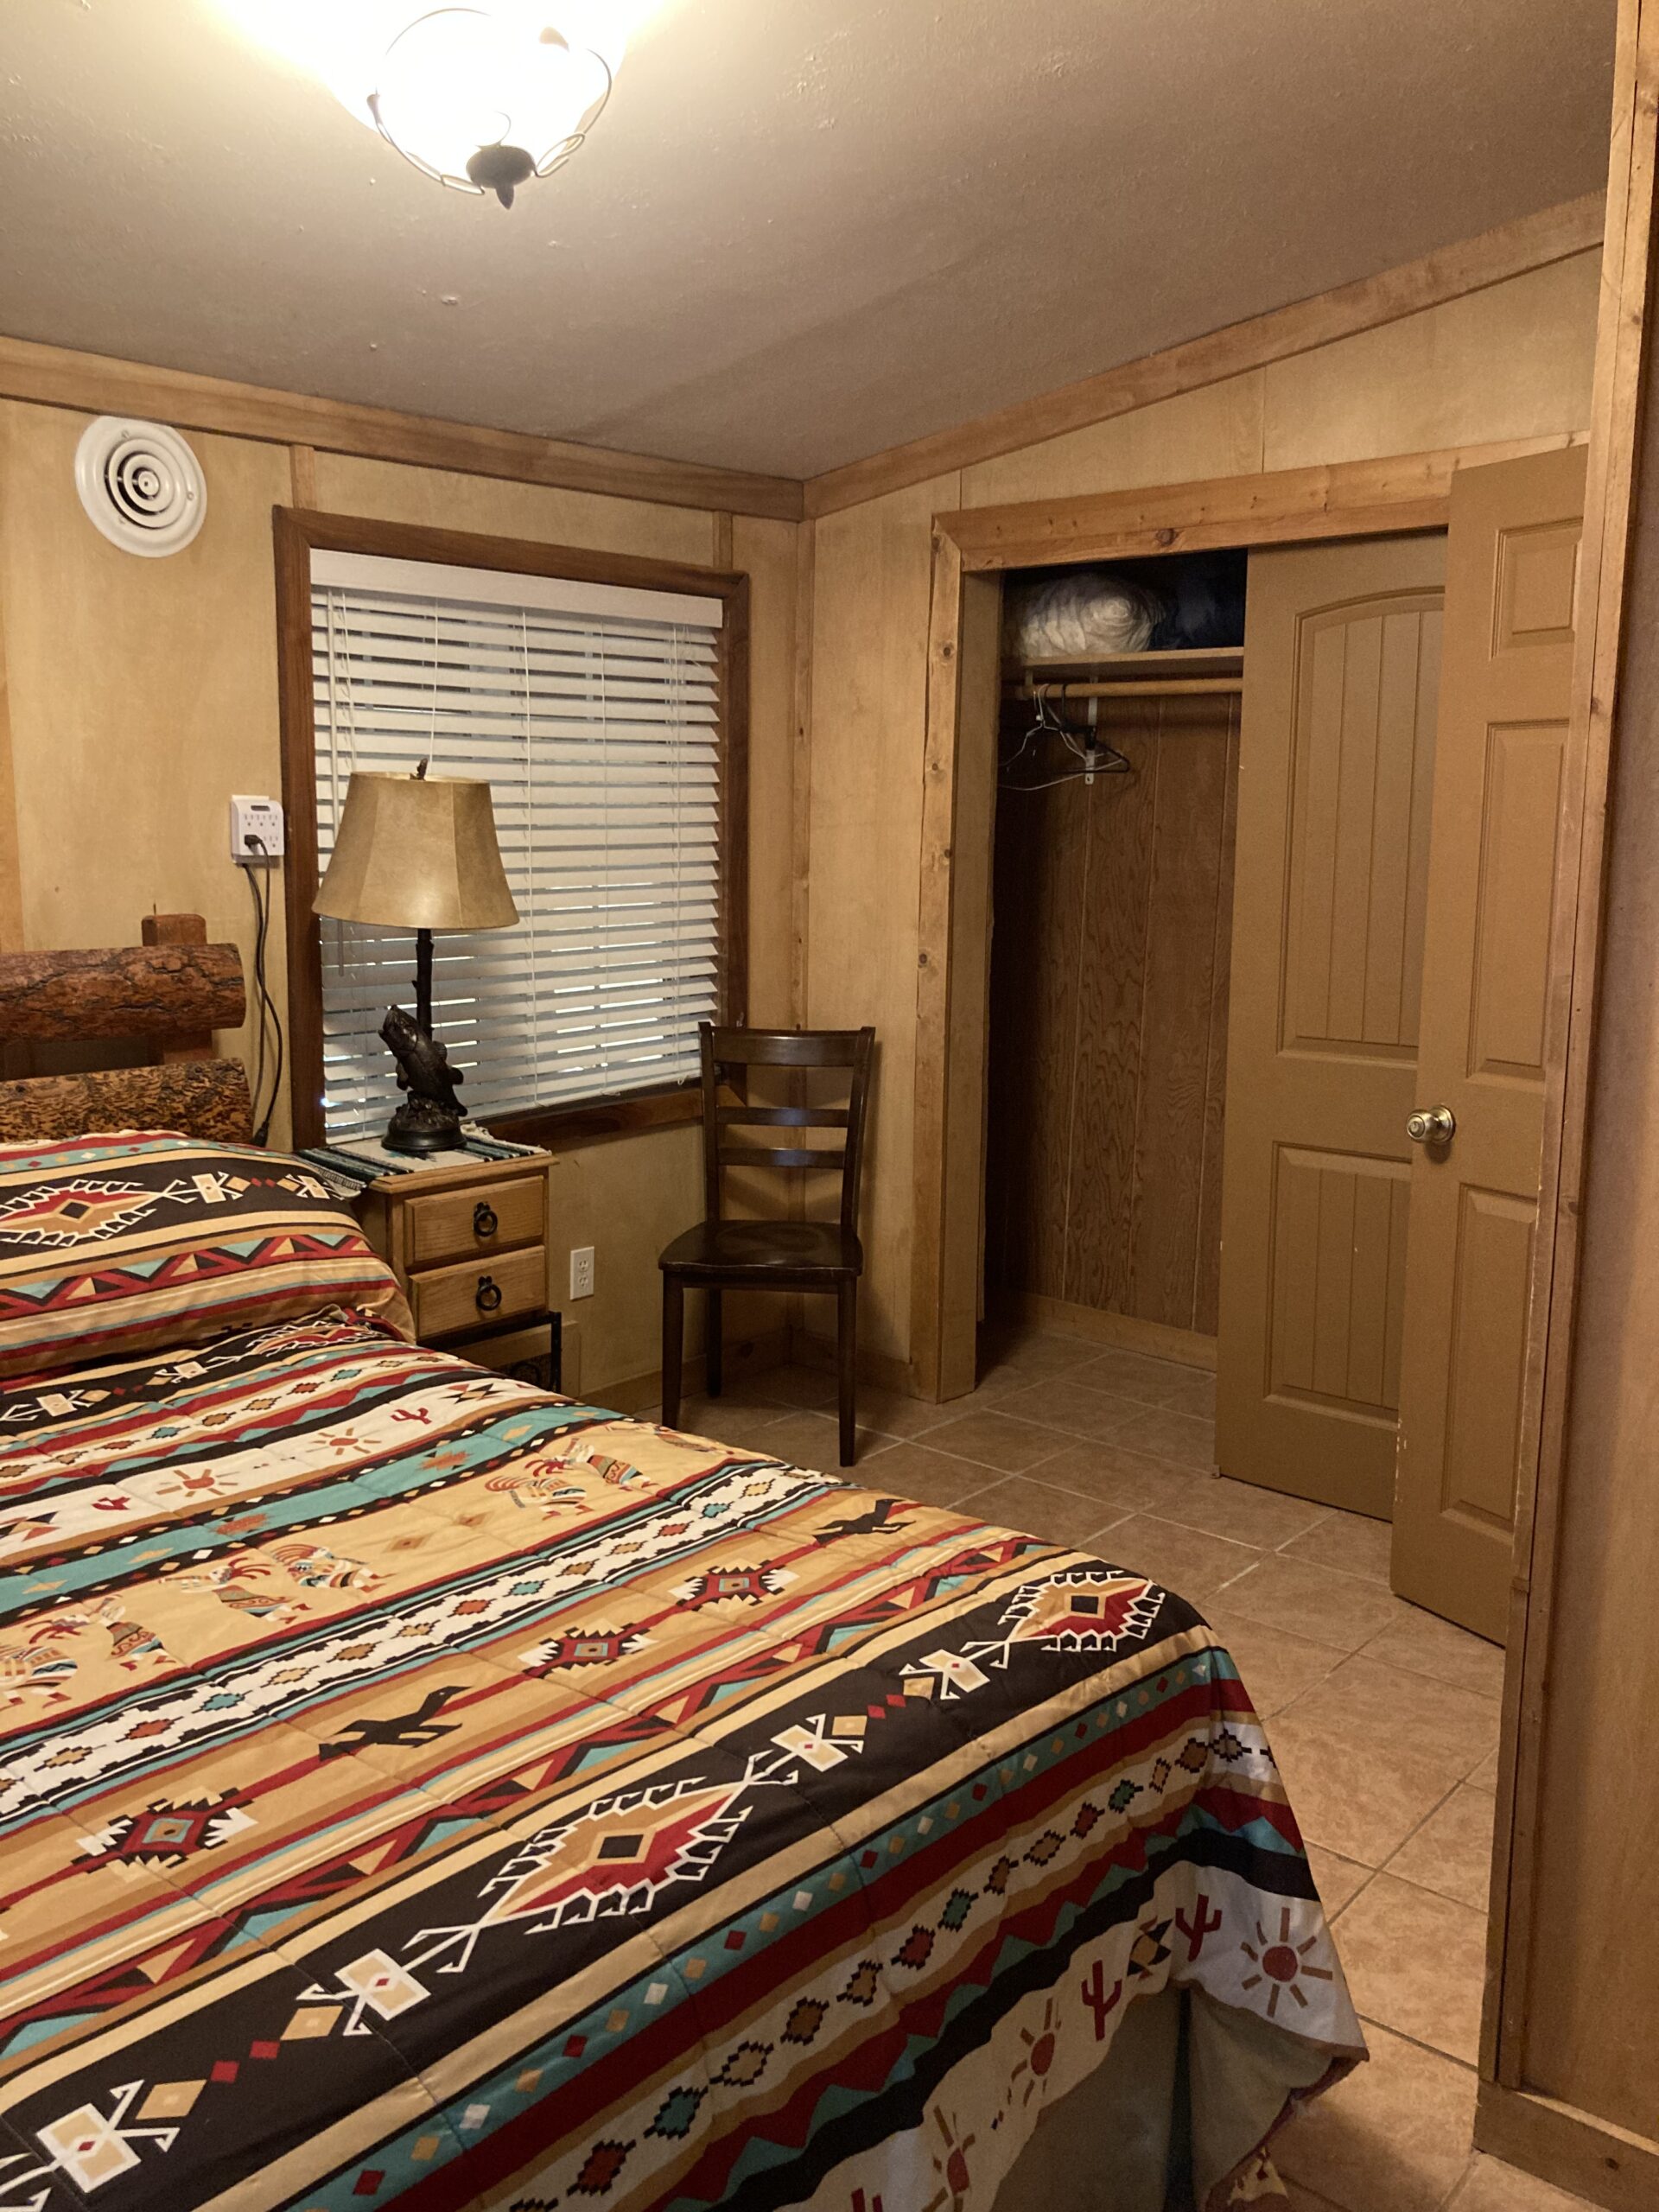 Cabin has two bedrooms, each with a queen bed